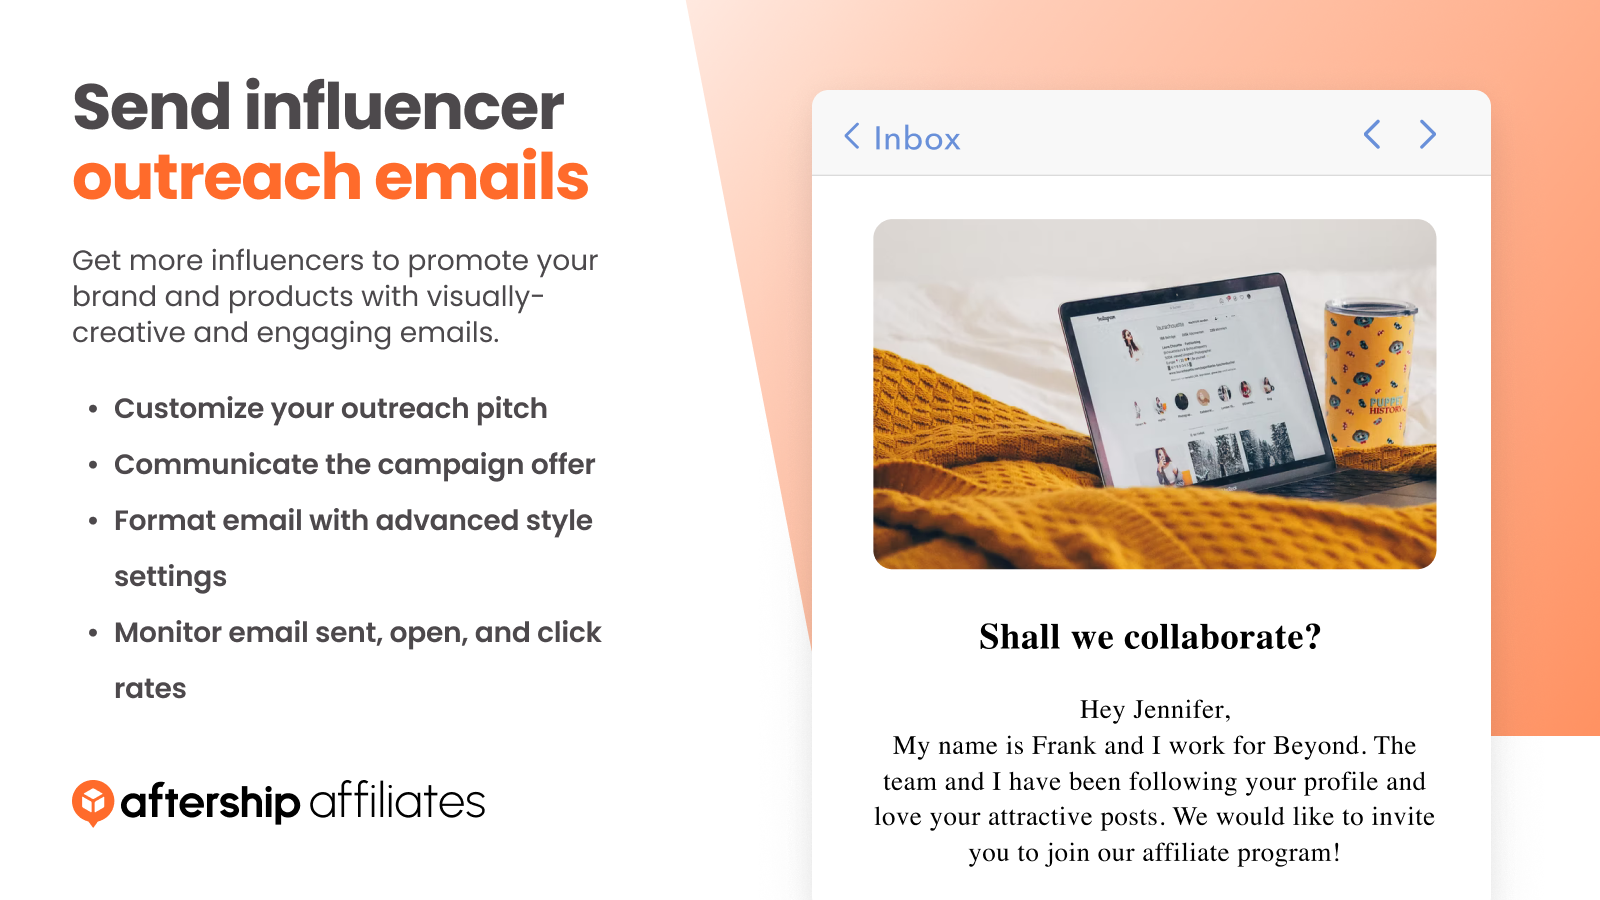 Send email invites to influencers 